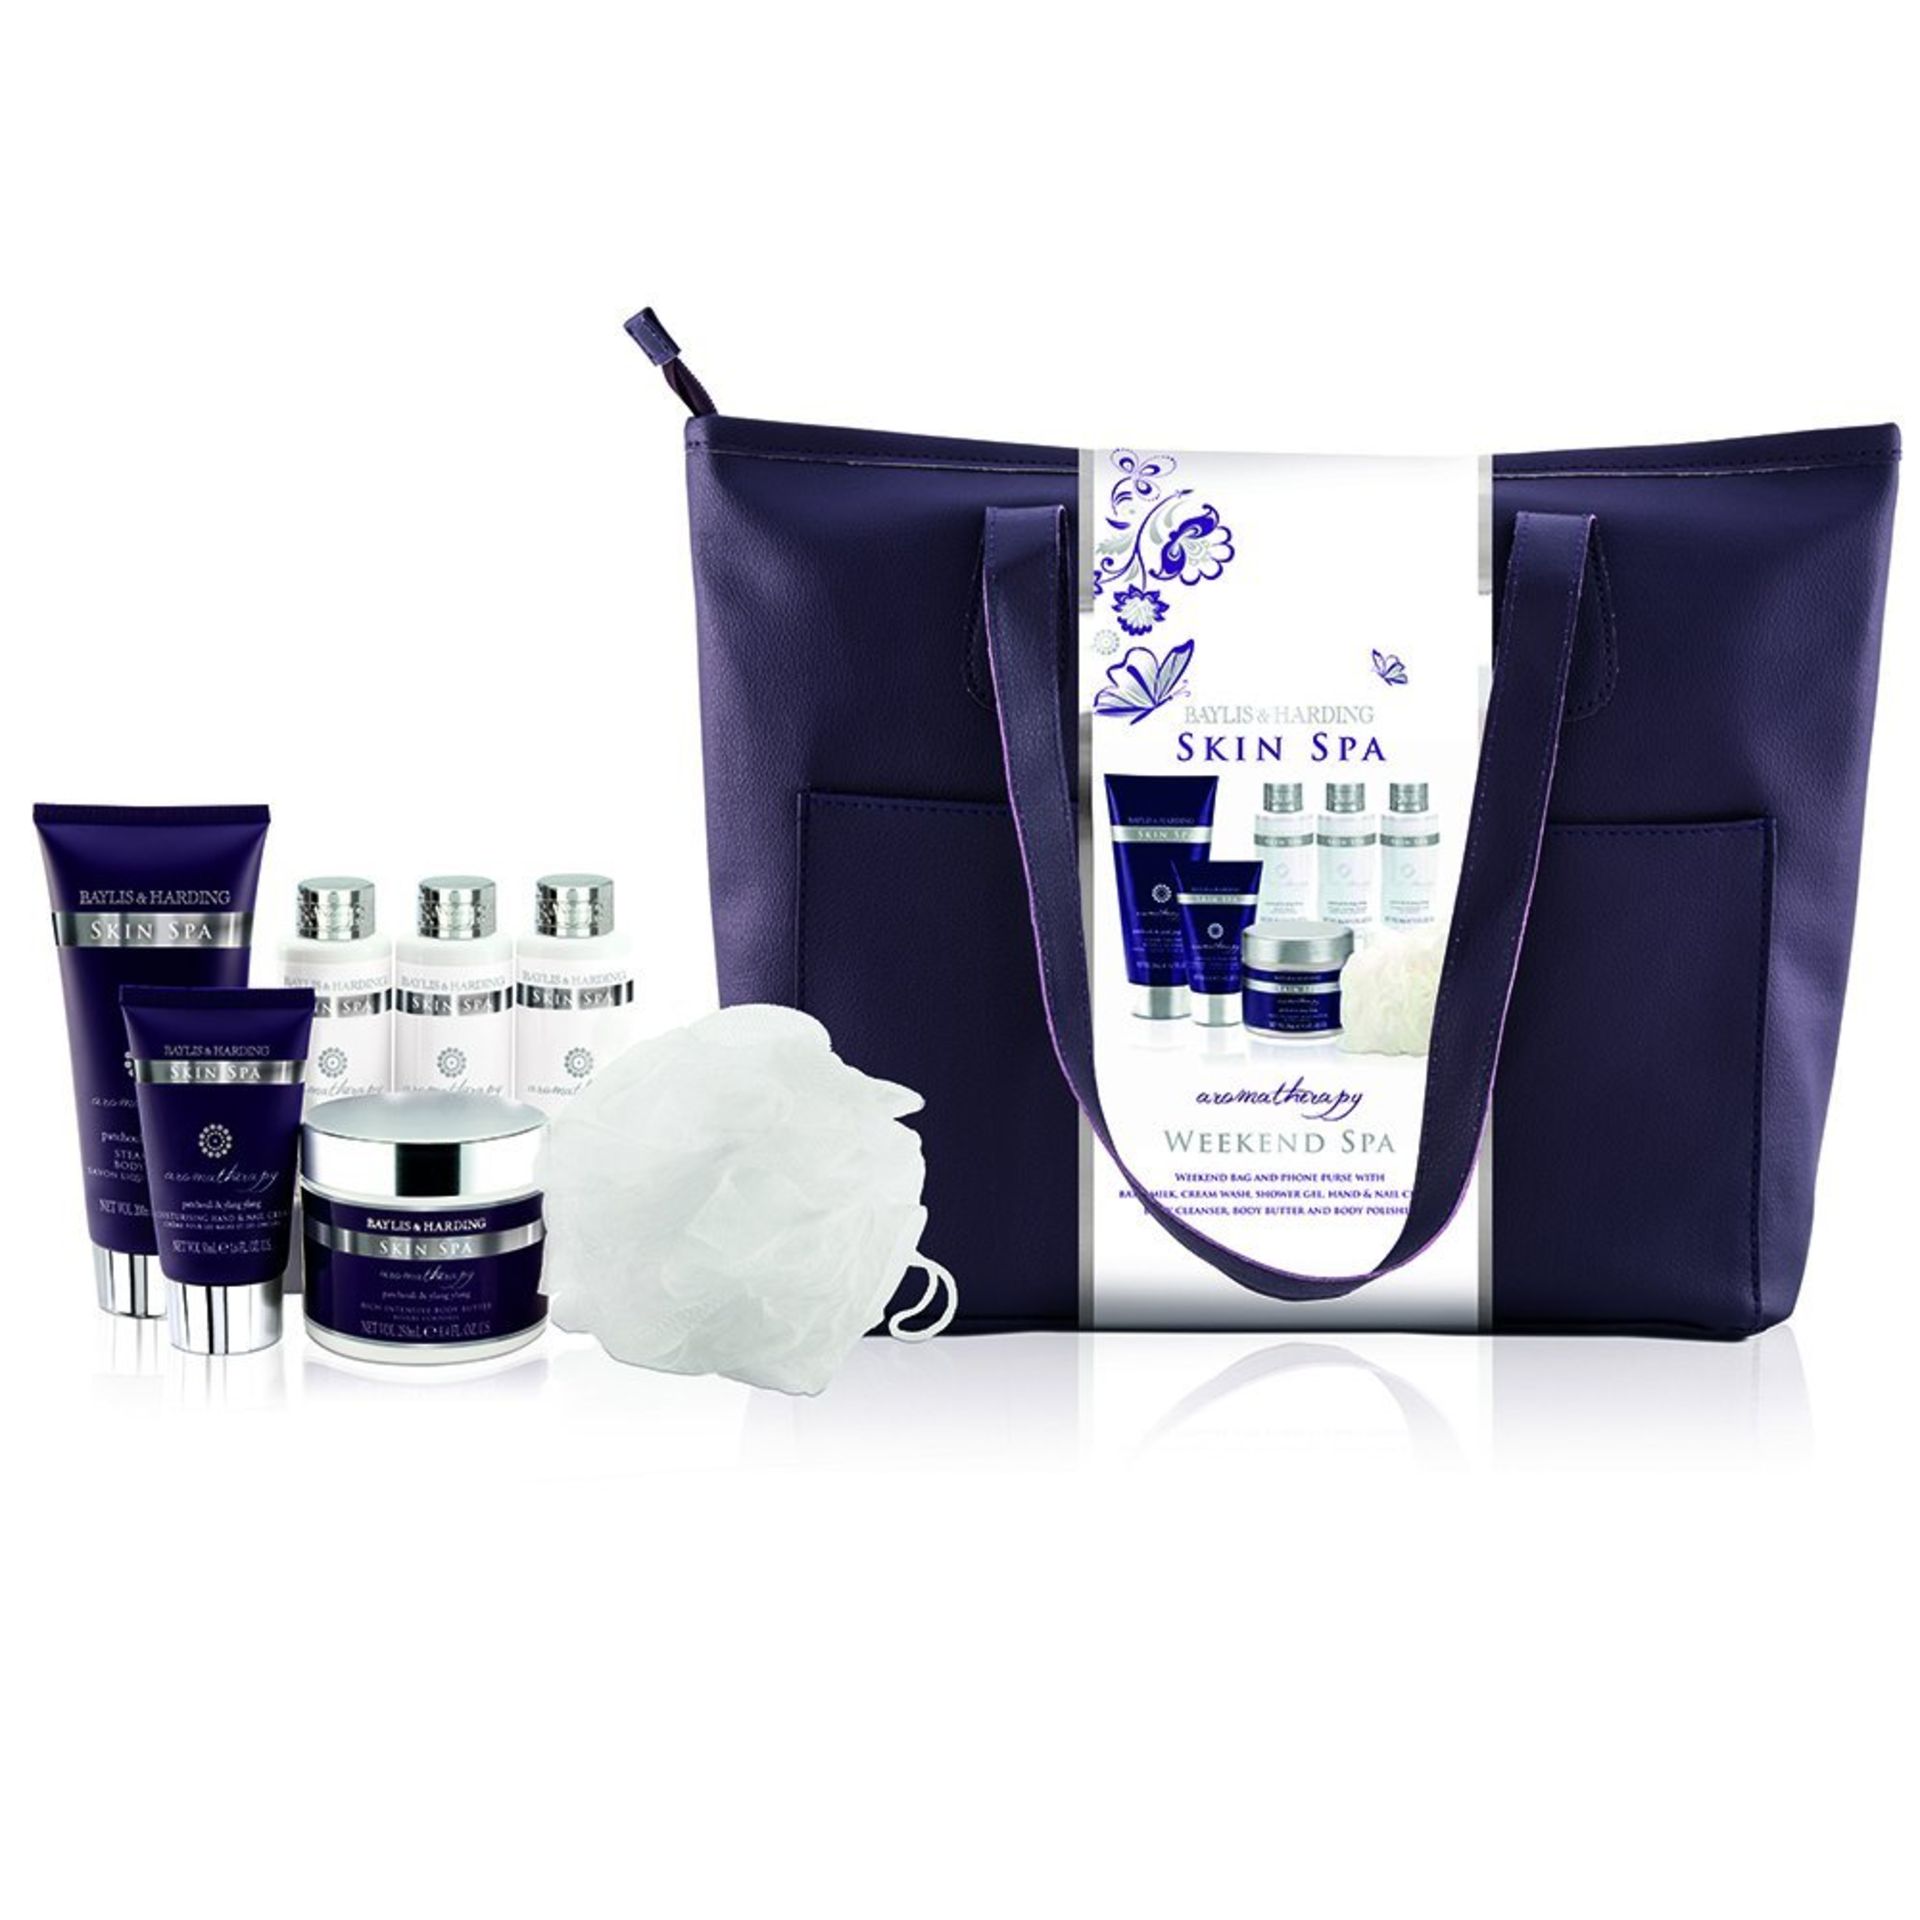 V Brand New Baylis & Harding Relax And Retreat Aromatherapy Skin Spa Weekend Bag Inc Body Butter -